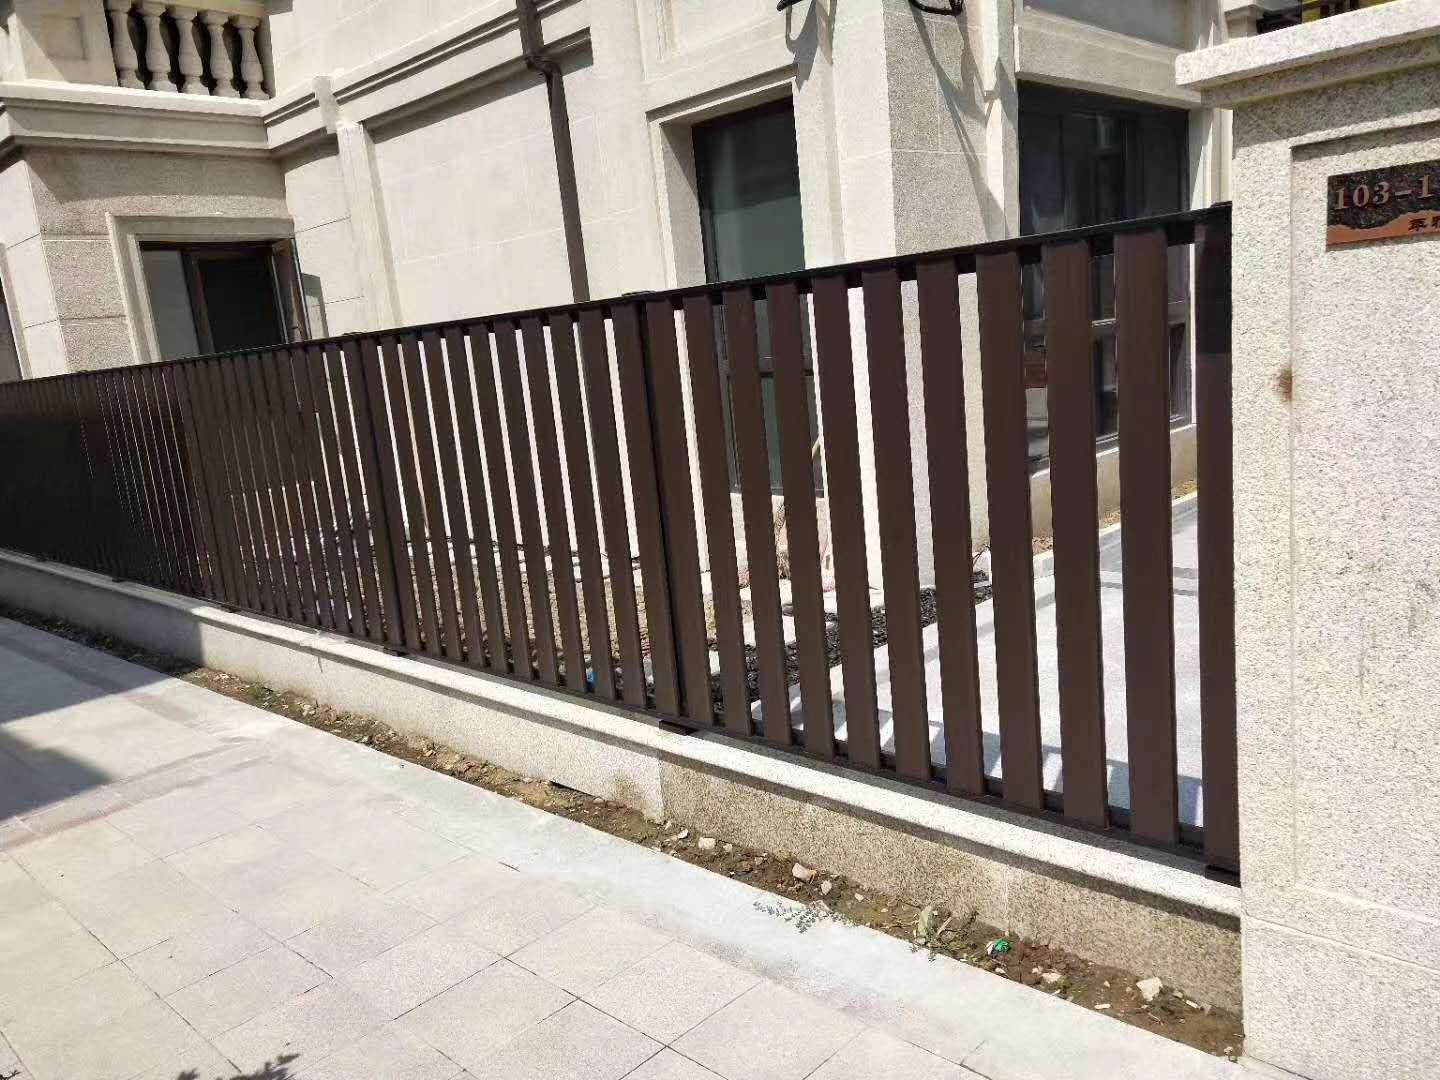 Aluminum Residential Picket Safety Fence Metal Fence for Garden or Yard or deck or pool with modern styles